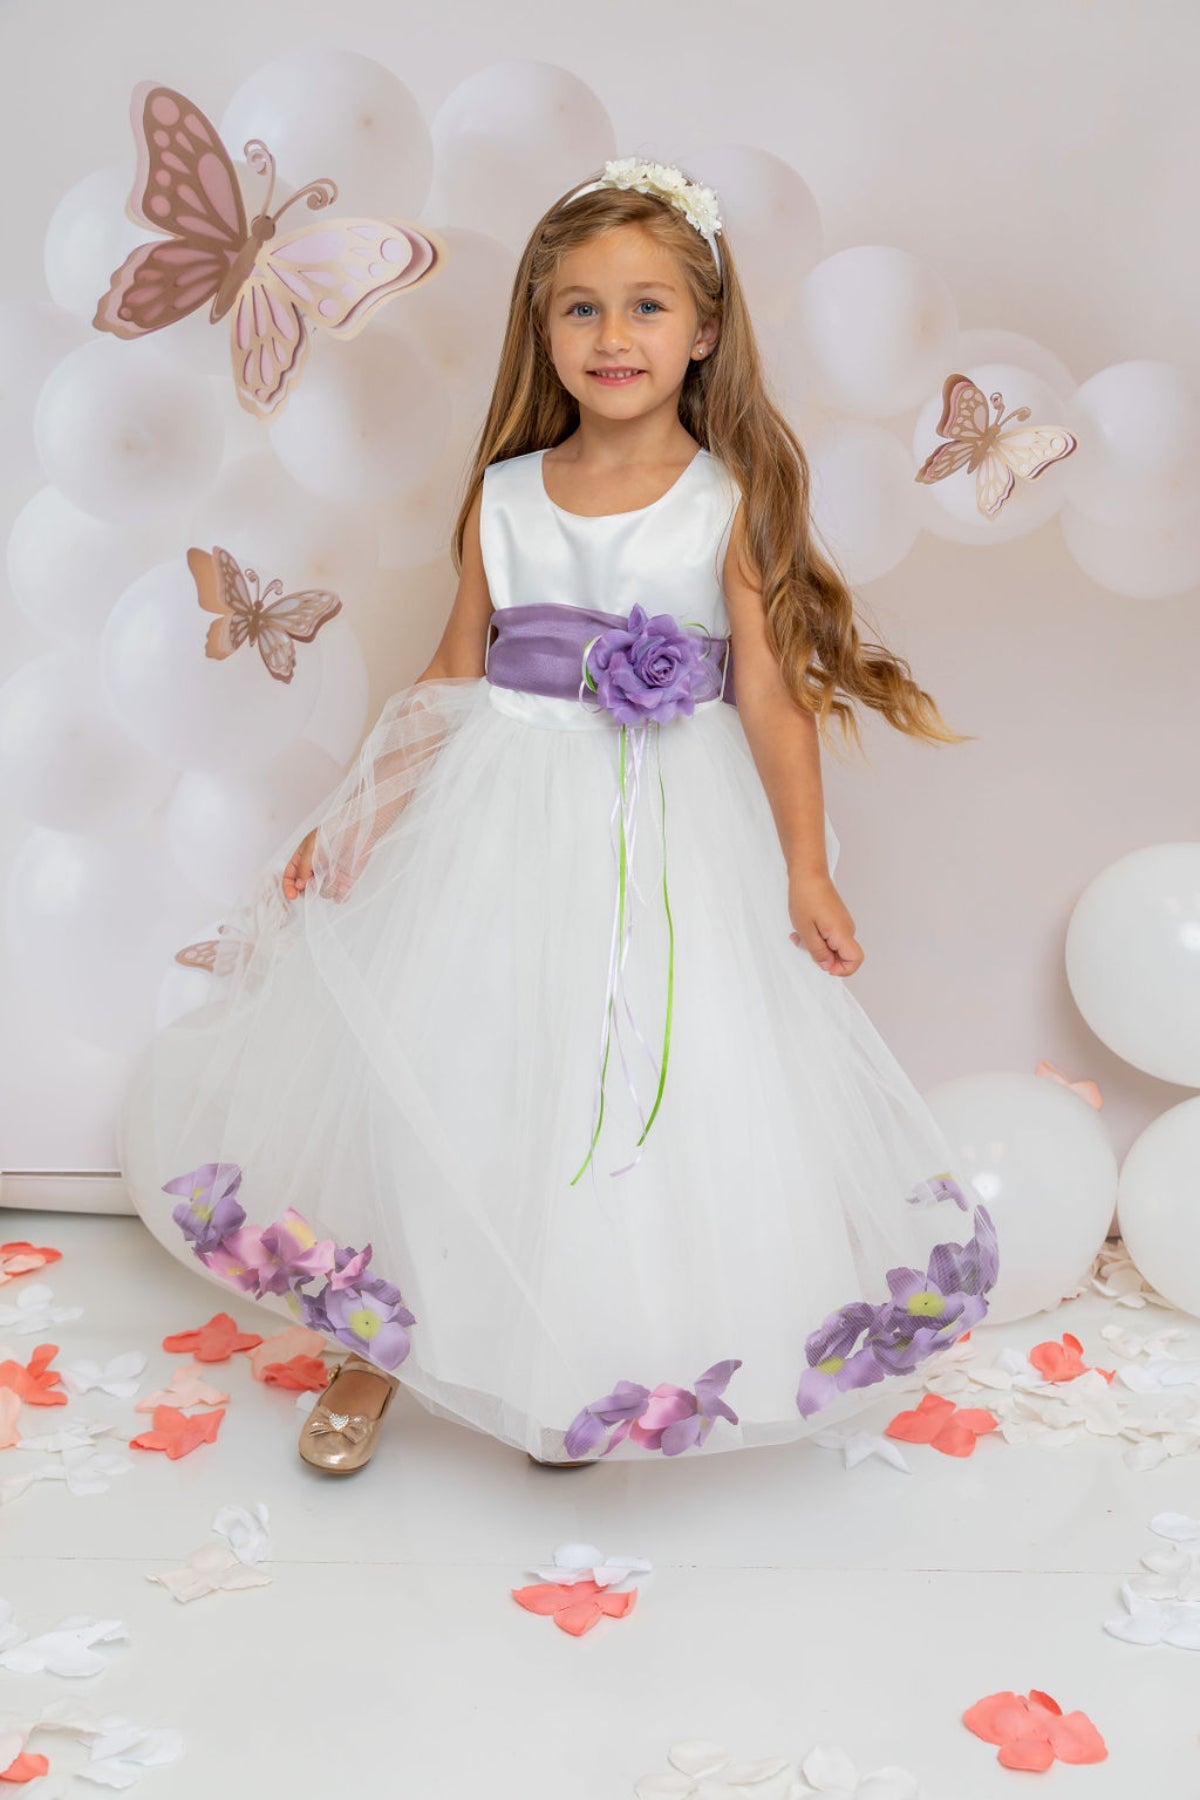 2021 Luxury Blush/Gold Flower Girl Dress With Long Sleeves, Big Bow, And  Backless Design Customizable Full Length Birthday Gown From  Uniquebridalboutique, $113.62 | DHgate.Com